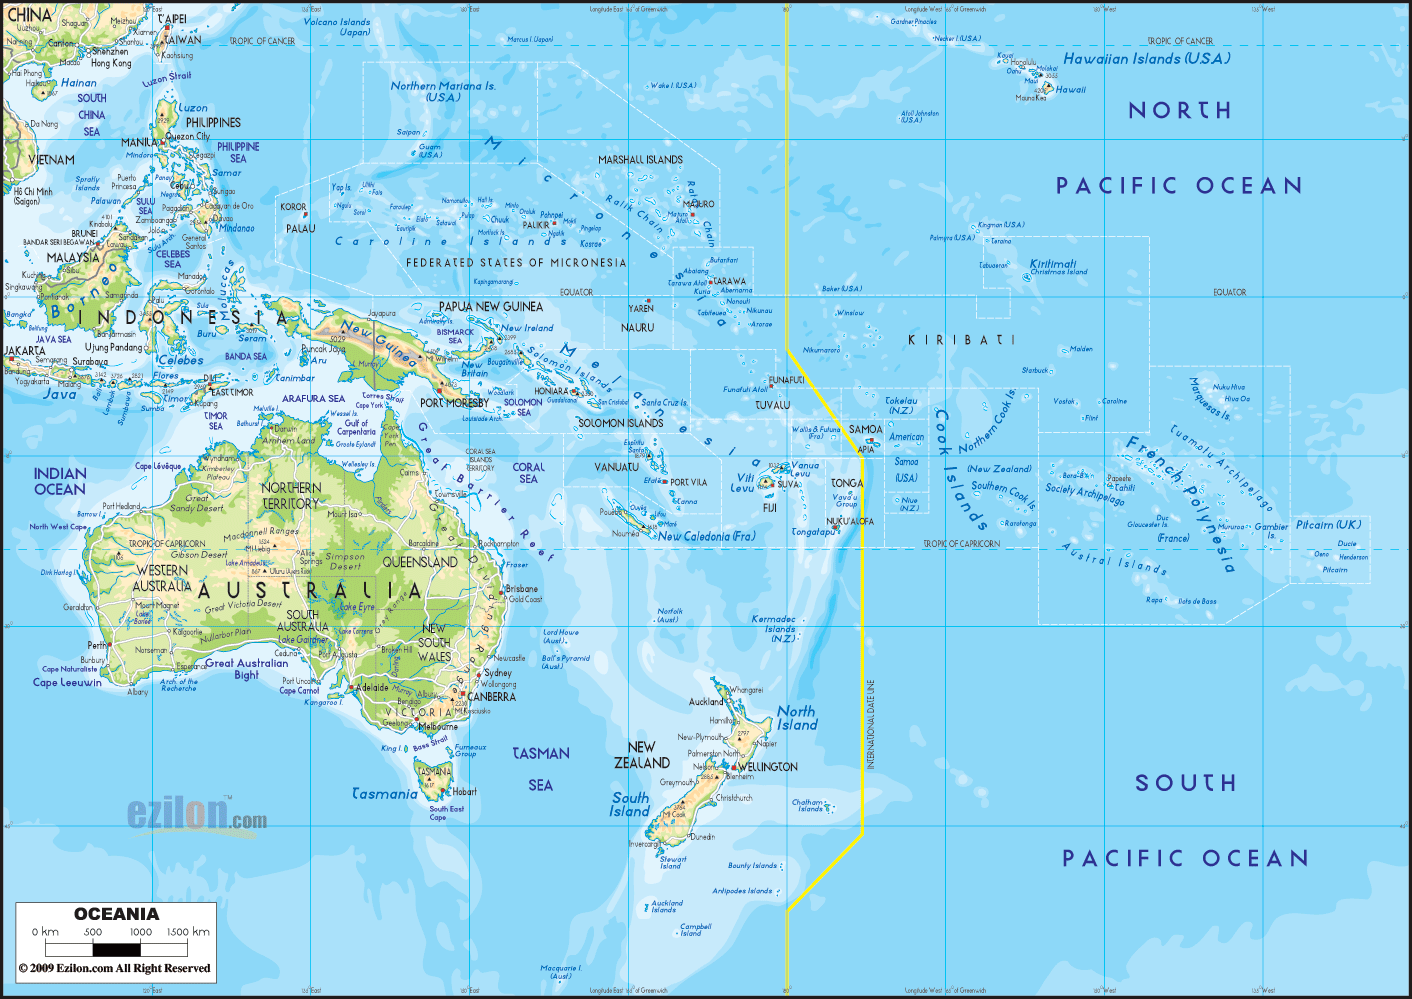 The Physical Map of Oceania showing major geographical features like elevations, mountain ranges, deserts, seas, lakes, plateaus, peninsulas, rivers, plains, landforms and other topographic features.